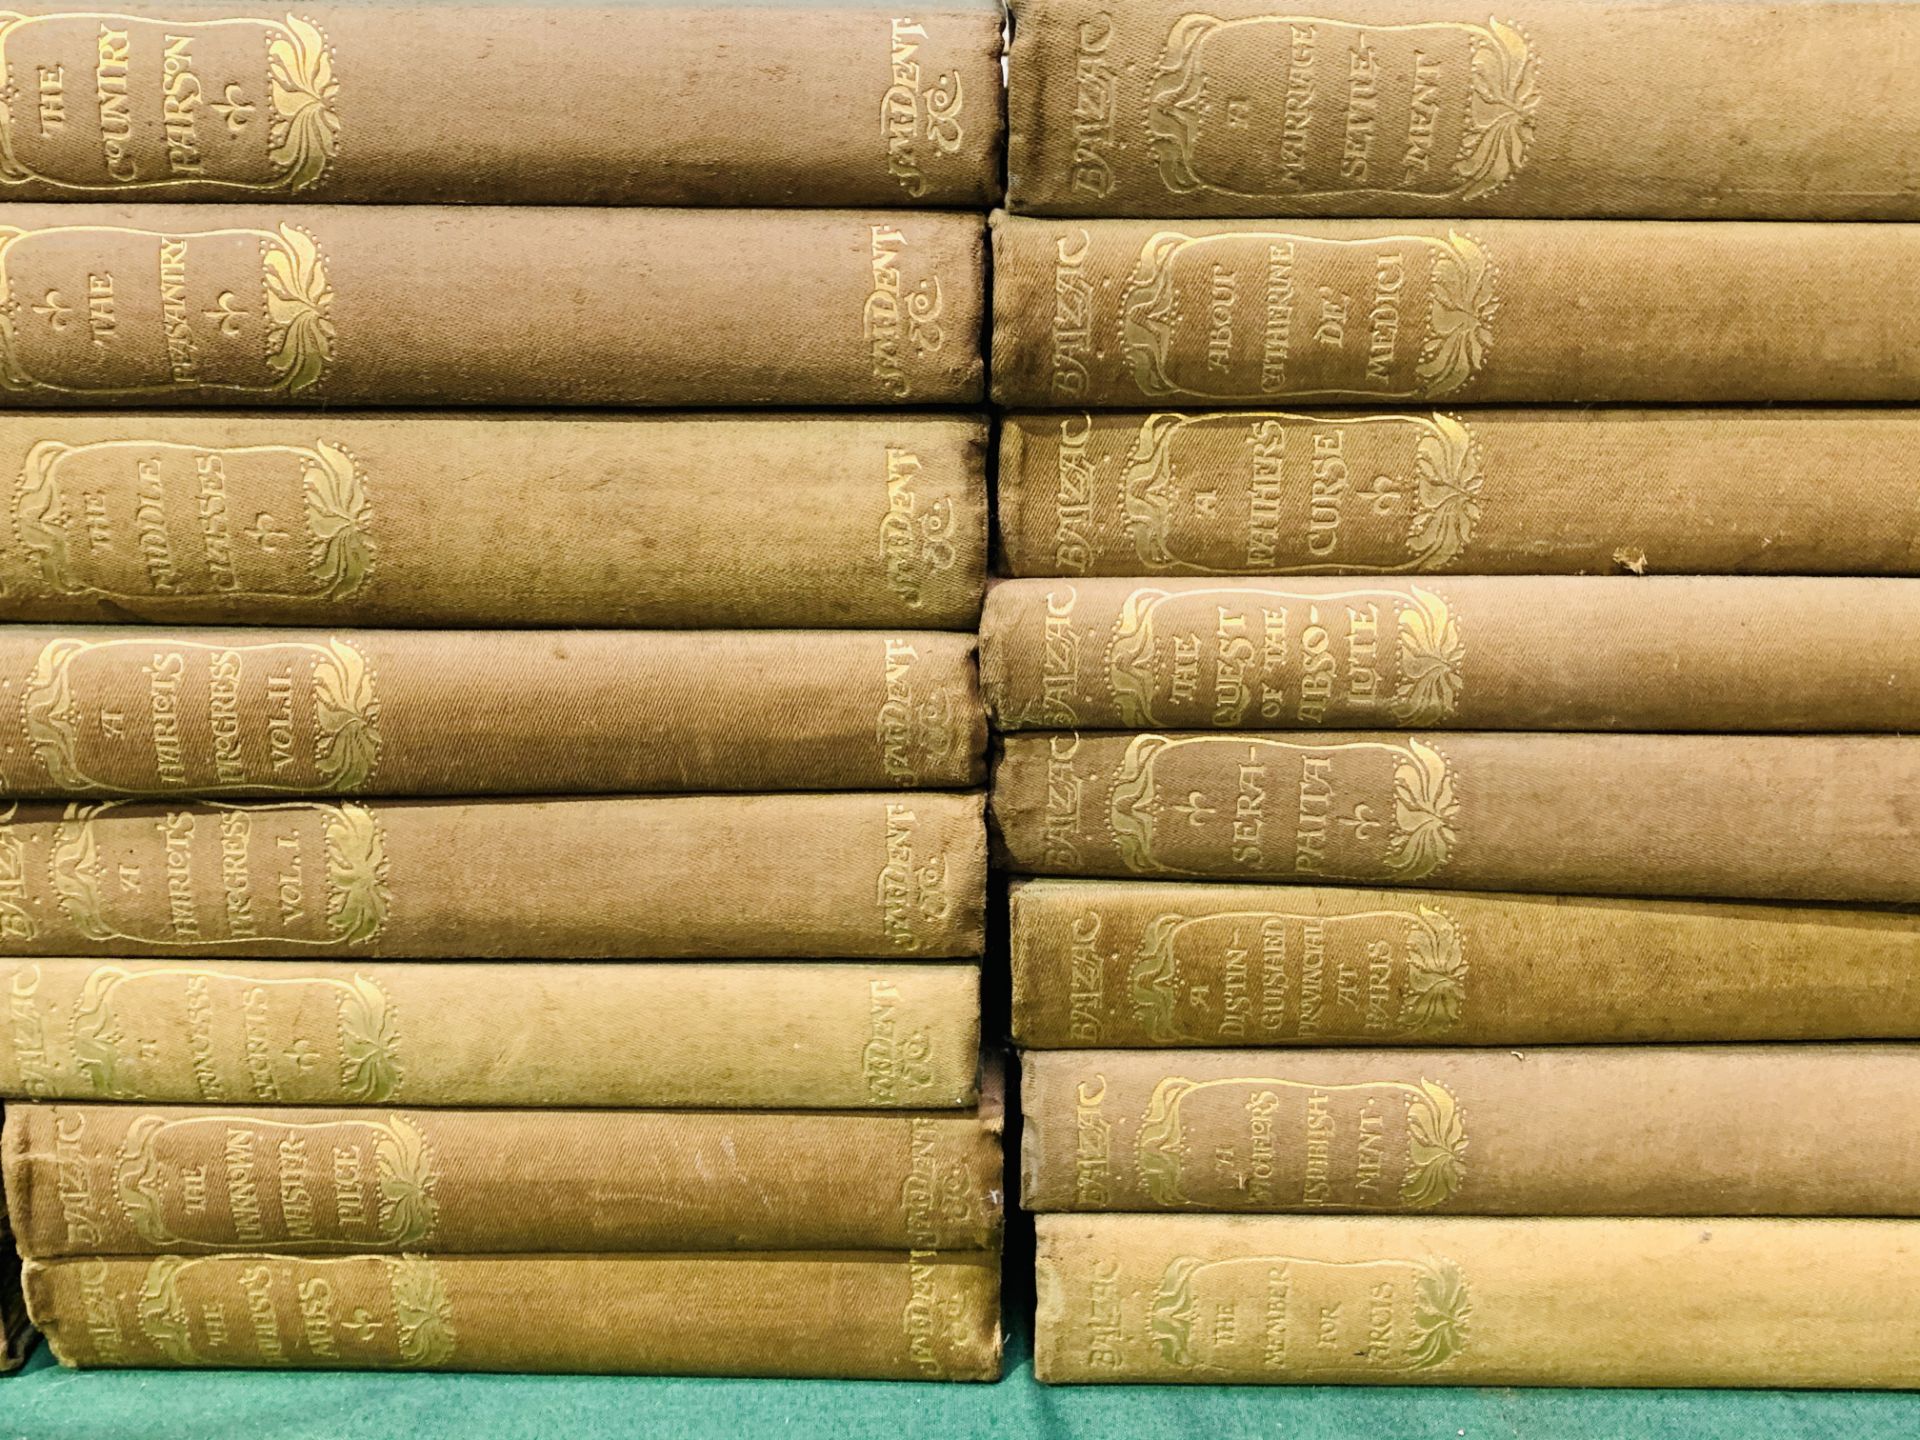 Forty volumes of works by Balzac, published by J M Dent and Co, London, dated 1890's.